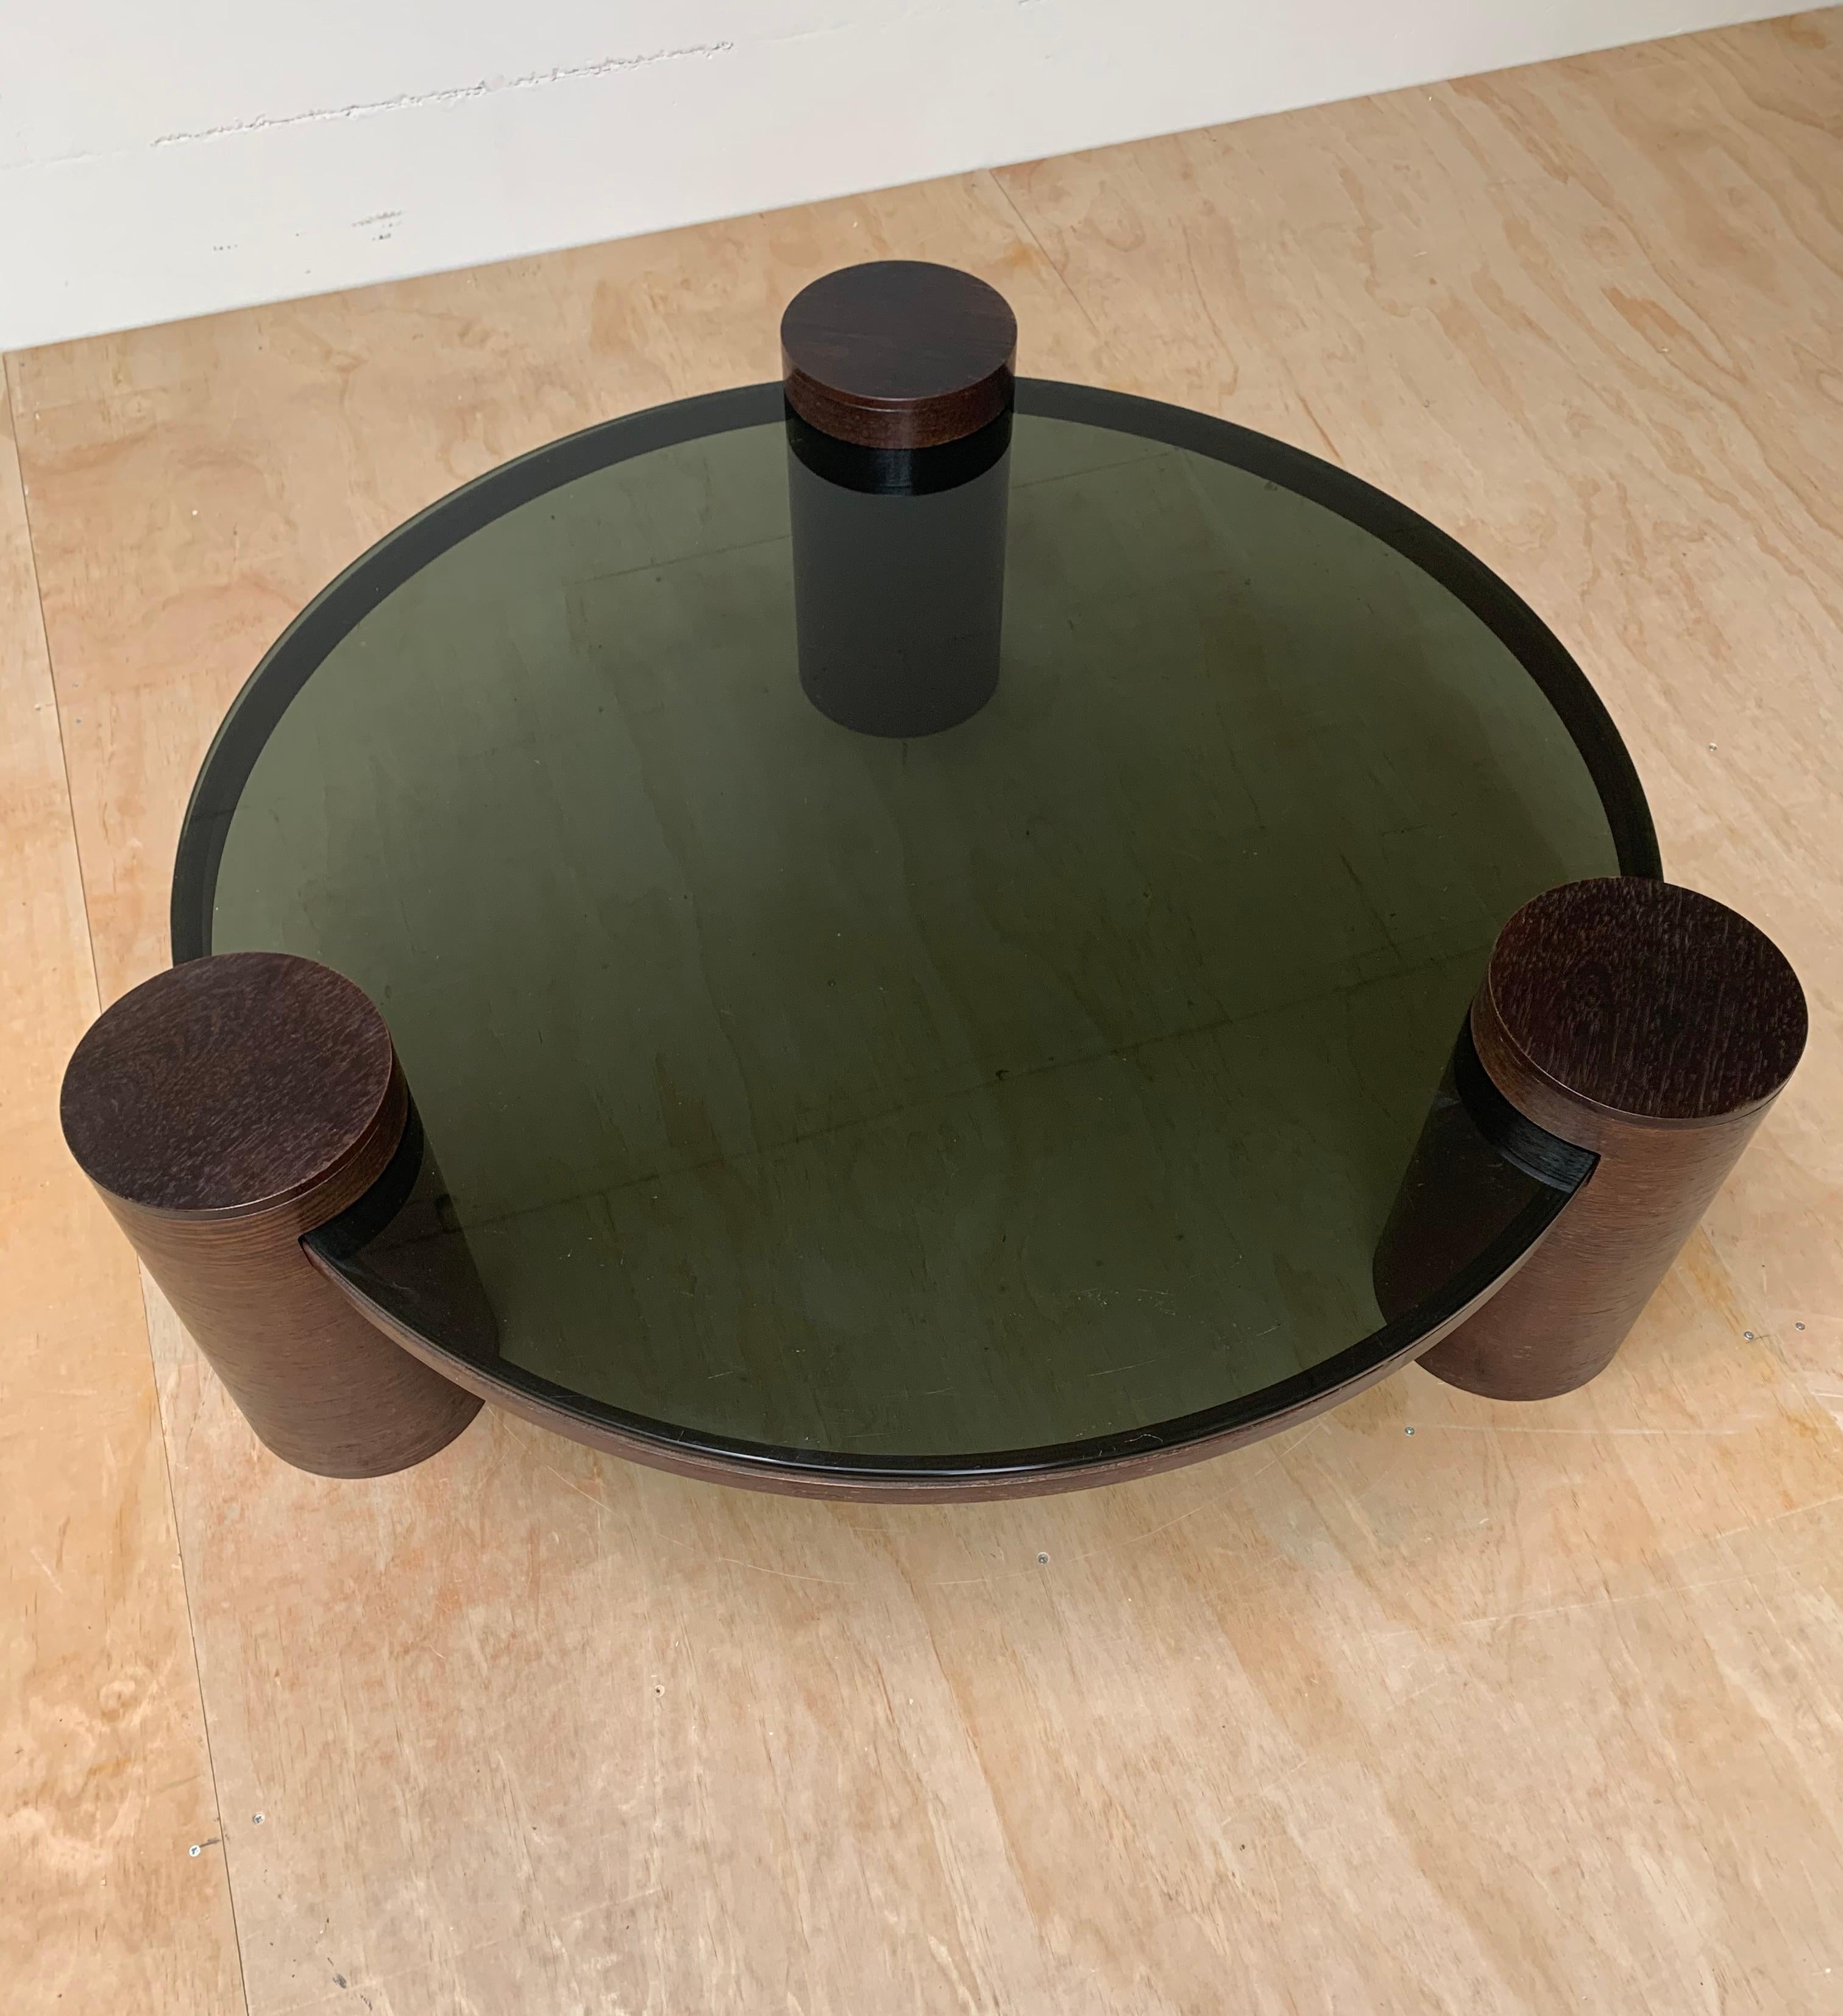 Highly stylish and possibly unique, vintage coffee table from the 1950s

Truly stylish and good condition pieces from the midcentury era are increasingly hard to find and to have found this coffee table felt extra special. Not only had we never seen